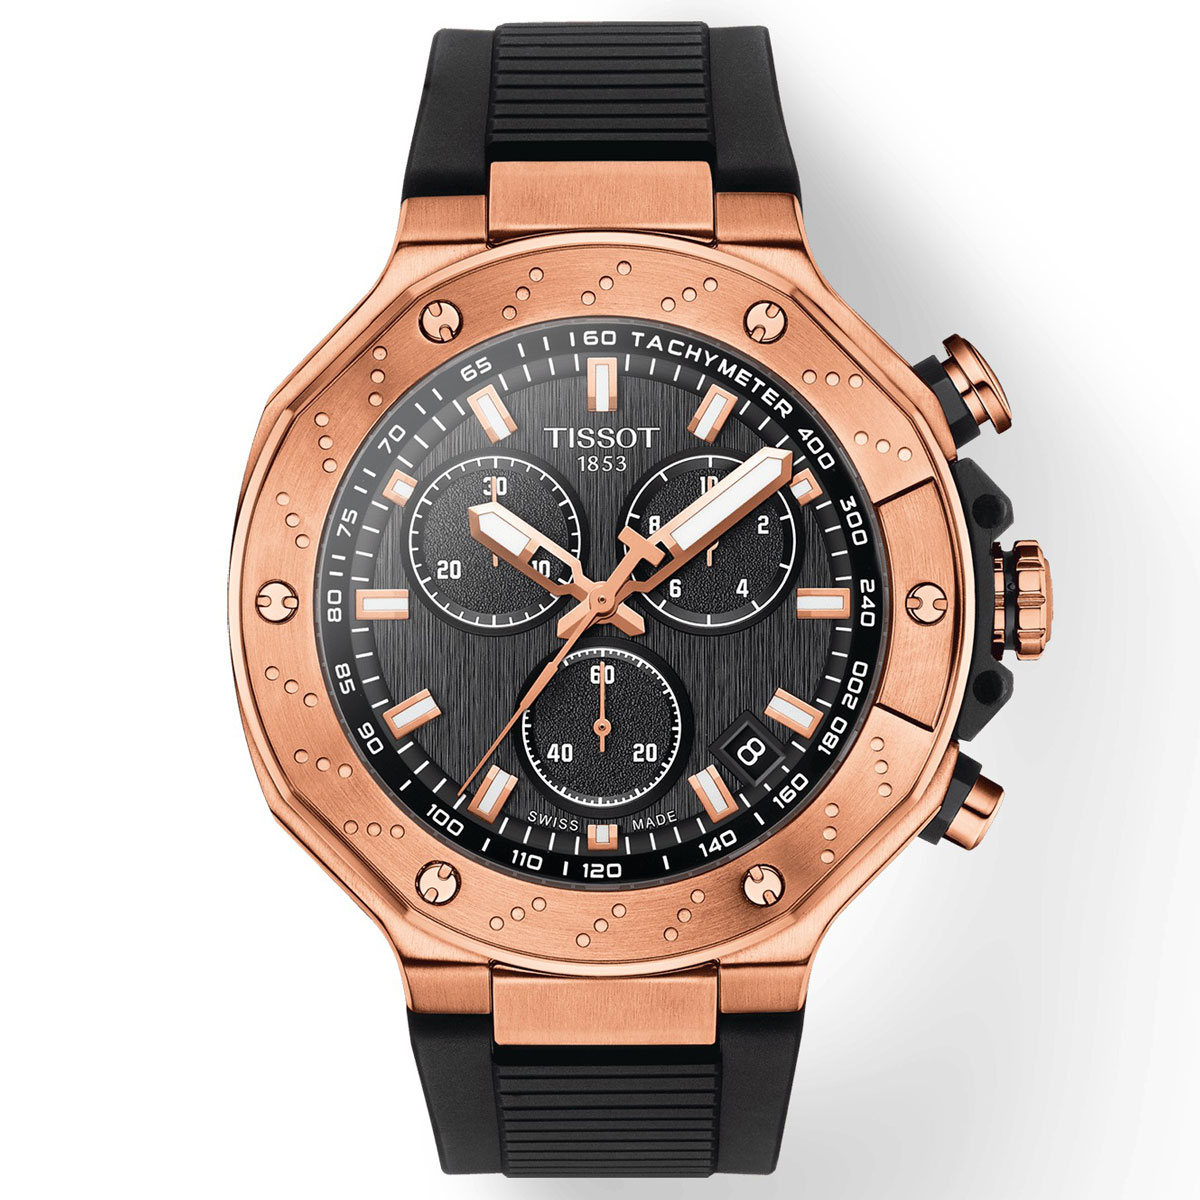 Tissot T-Race Chronograph Black Dial Rose Gold PVD | New York Jewelers ...